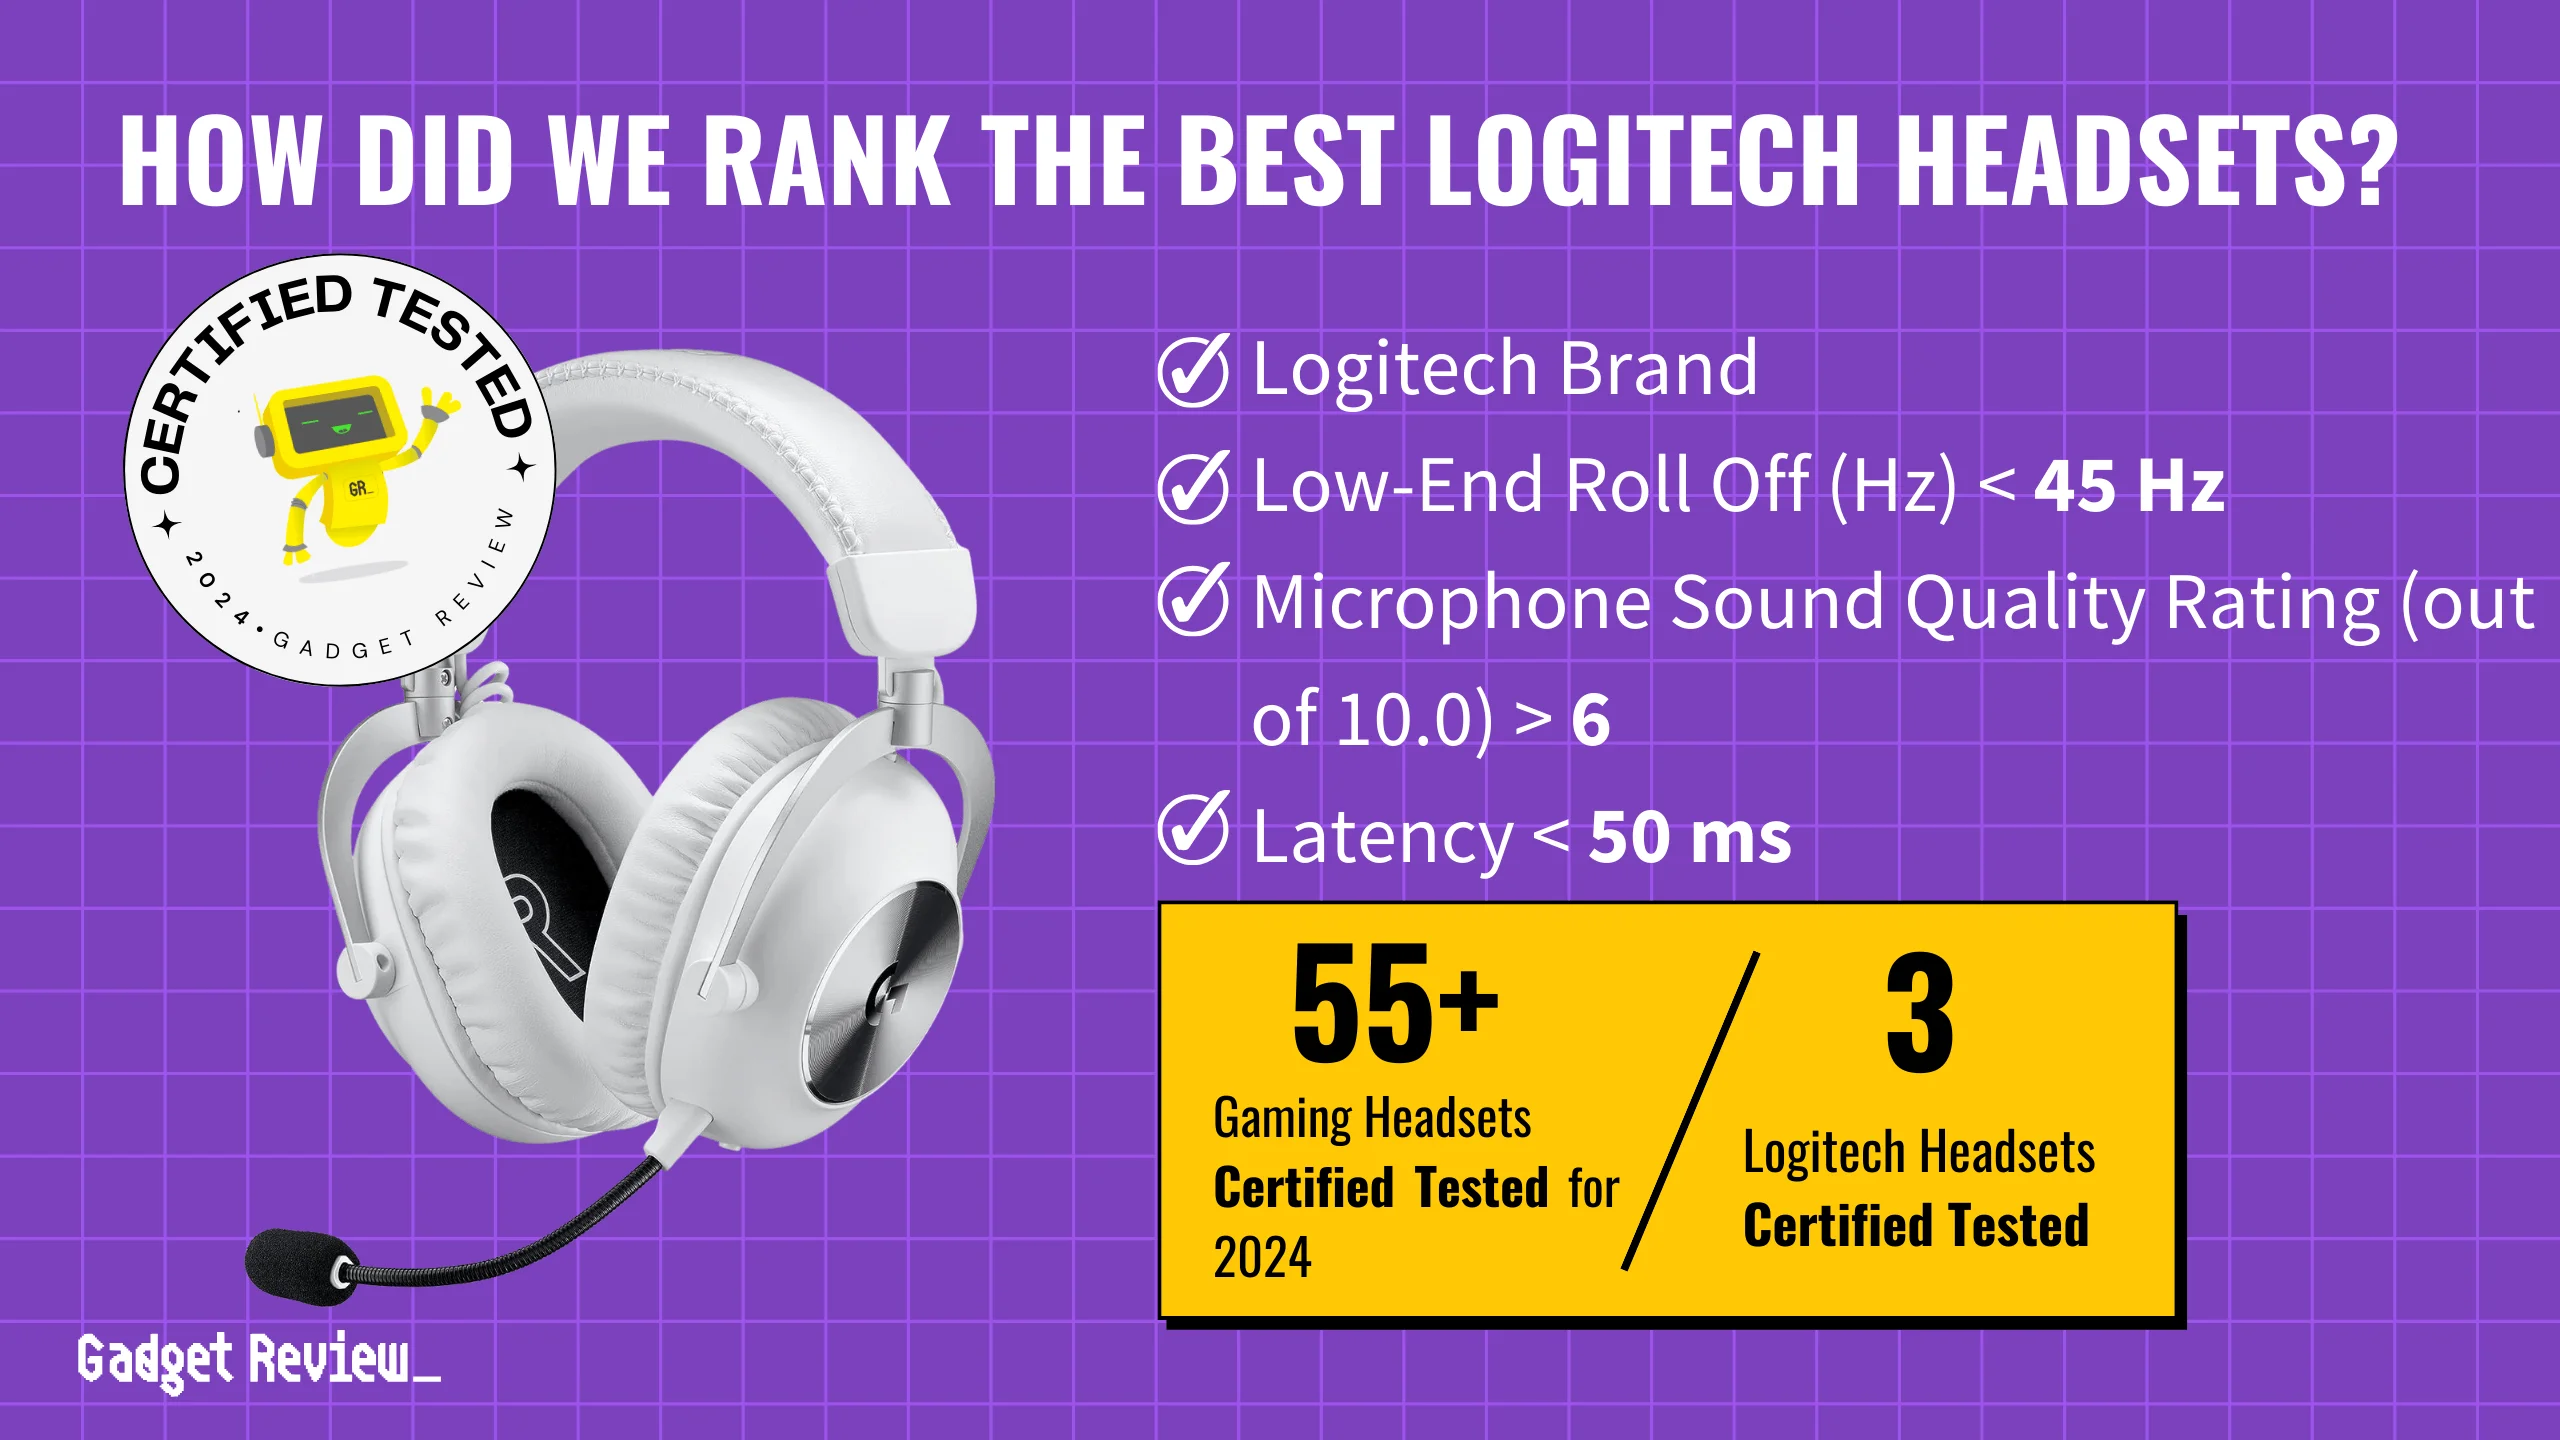 What’s the Best Logitech Headset? 3 Options Ranked